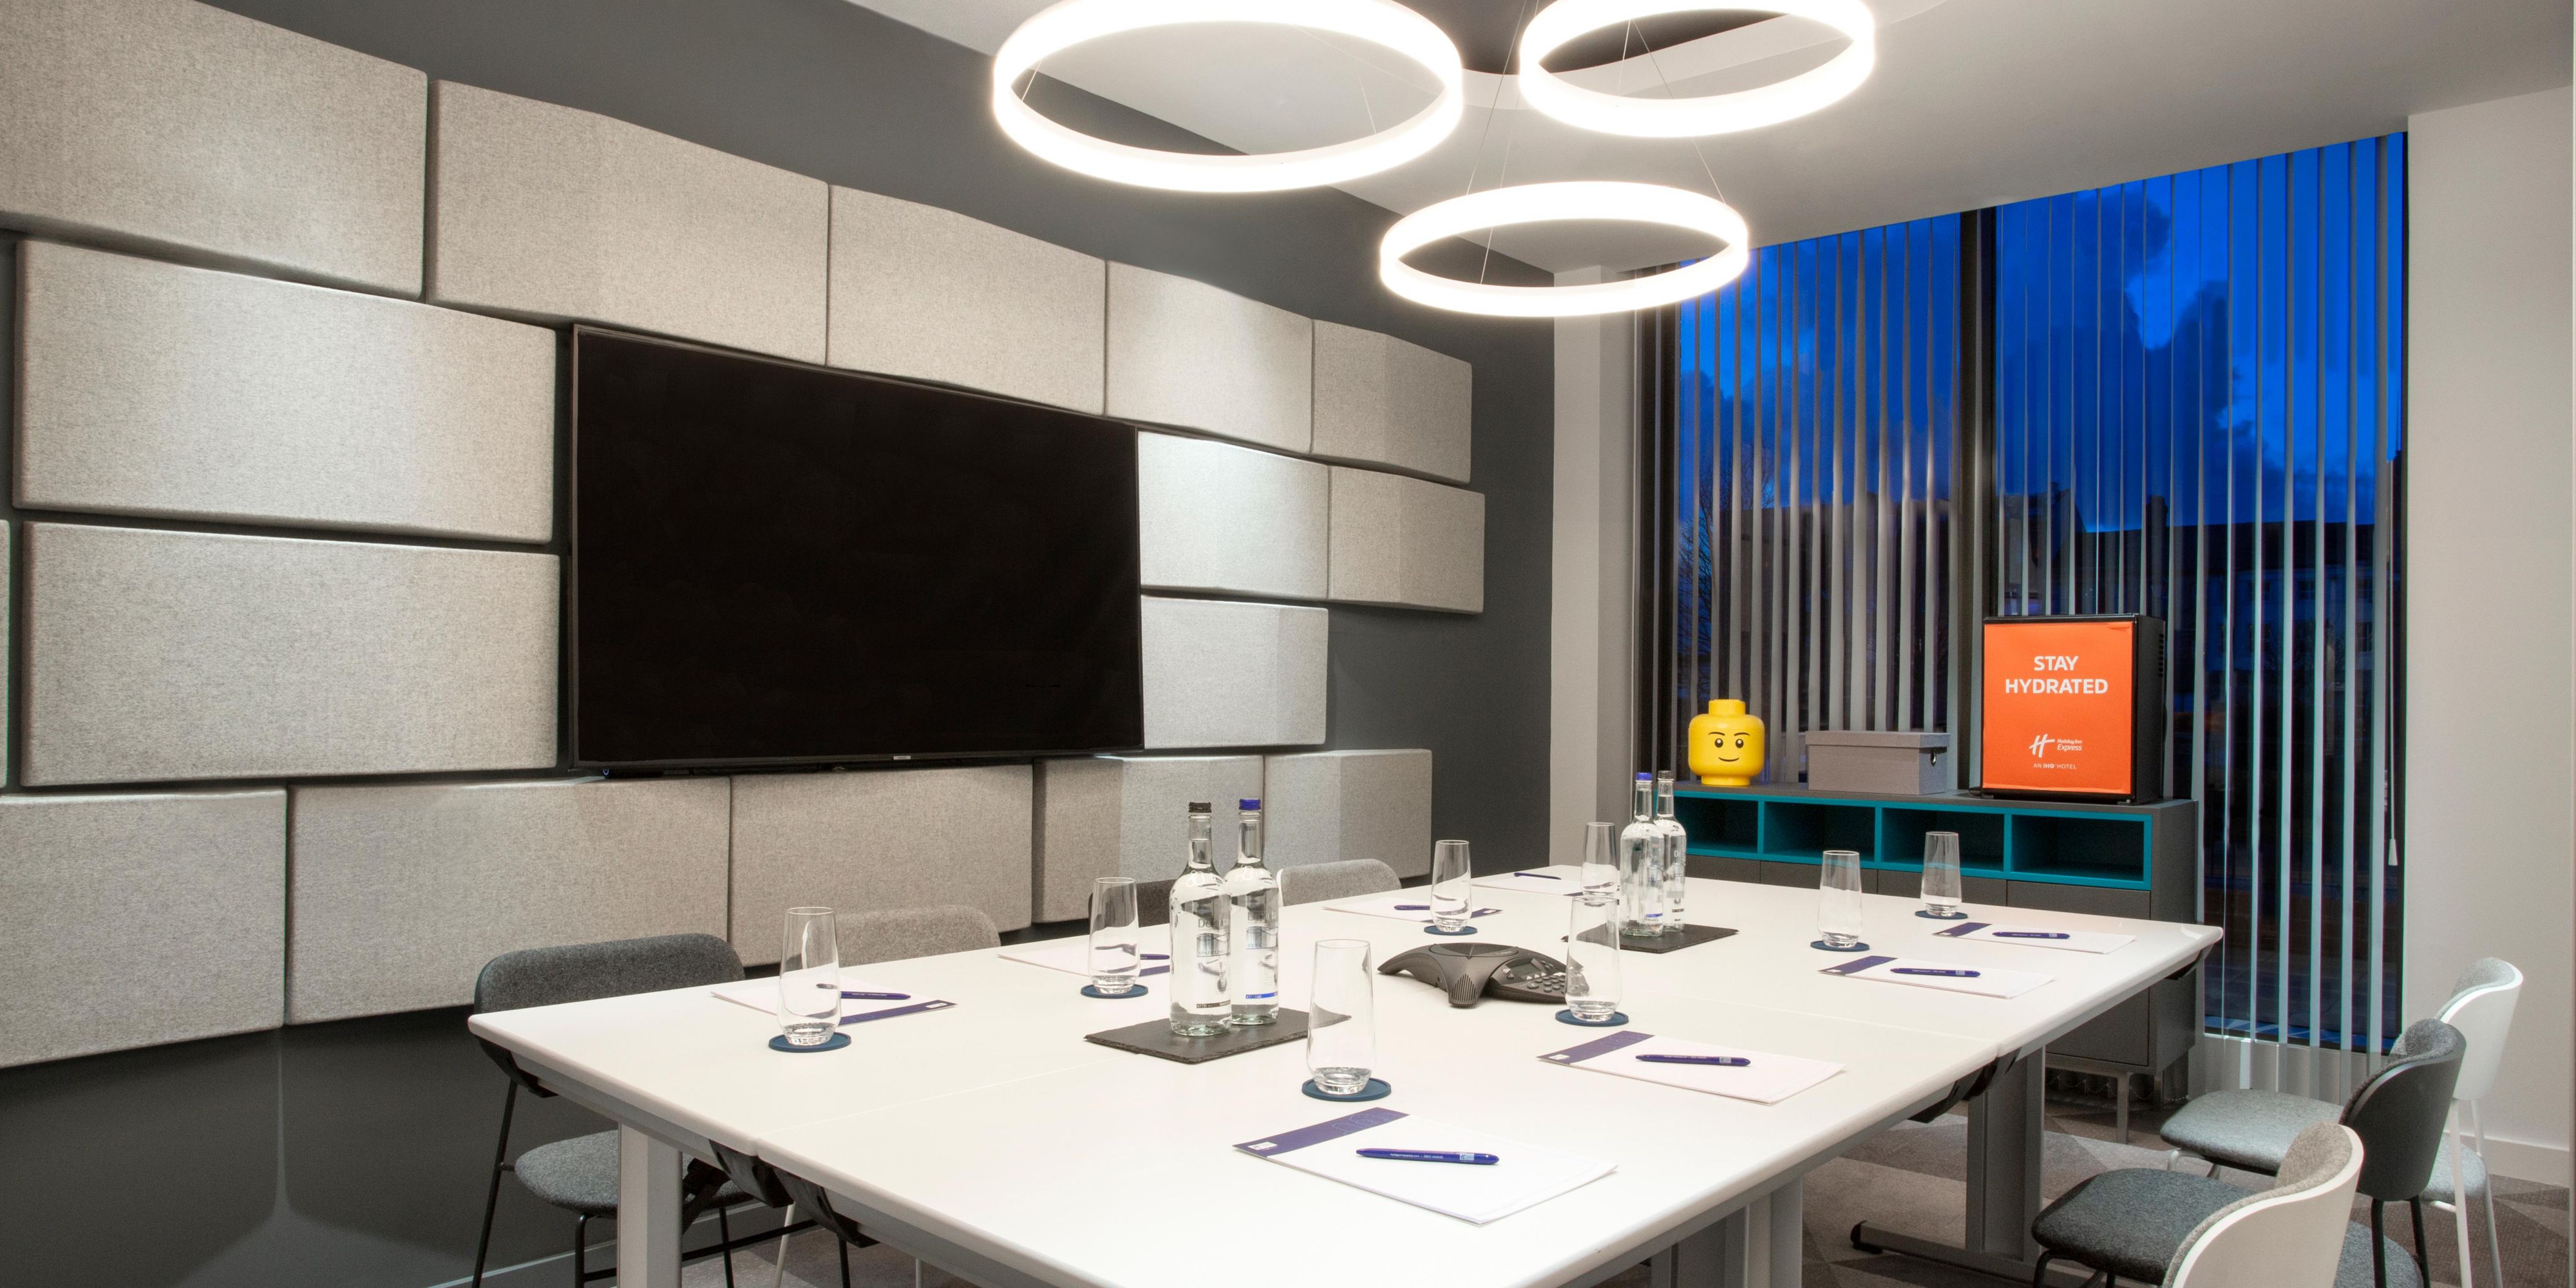 3 meeting rooms on-site, ideal for training, meetings or interviews. Capacity of 30 delegates.